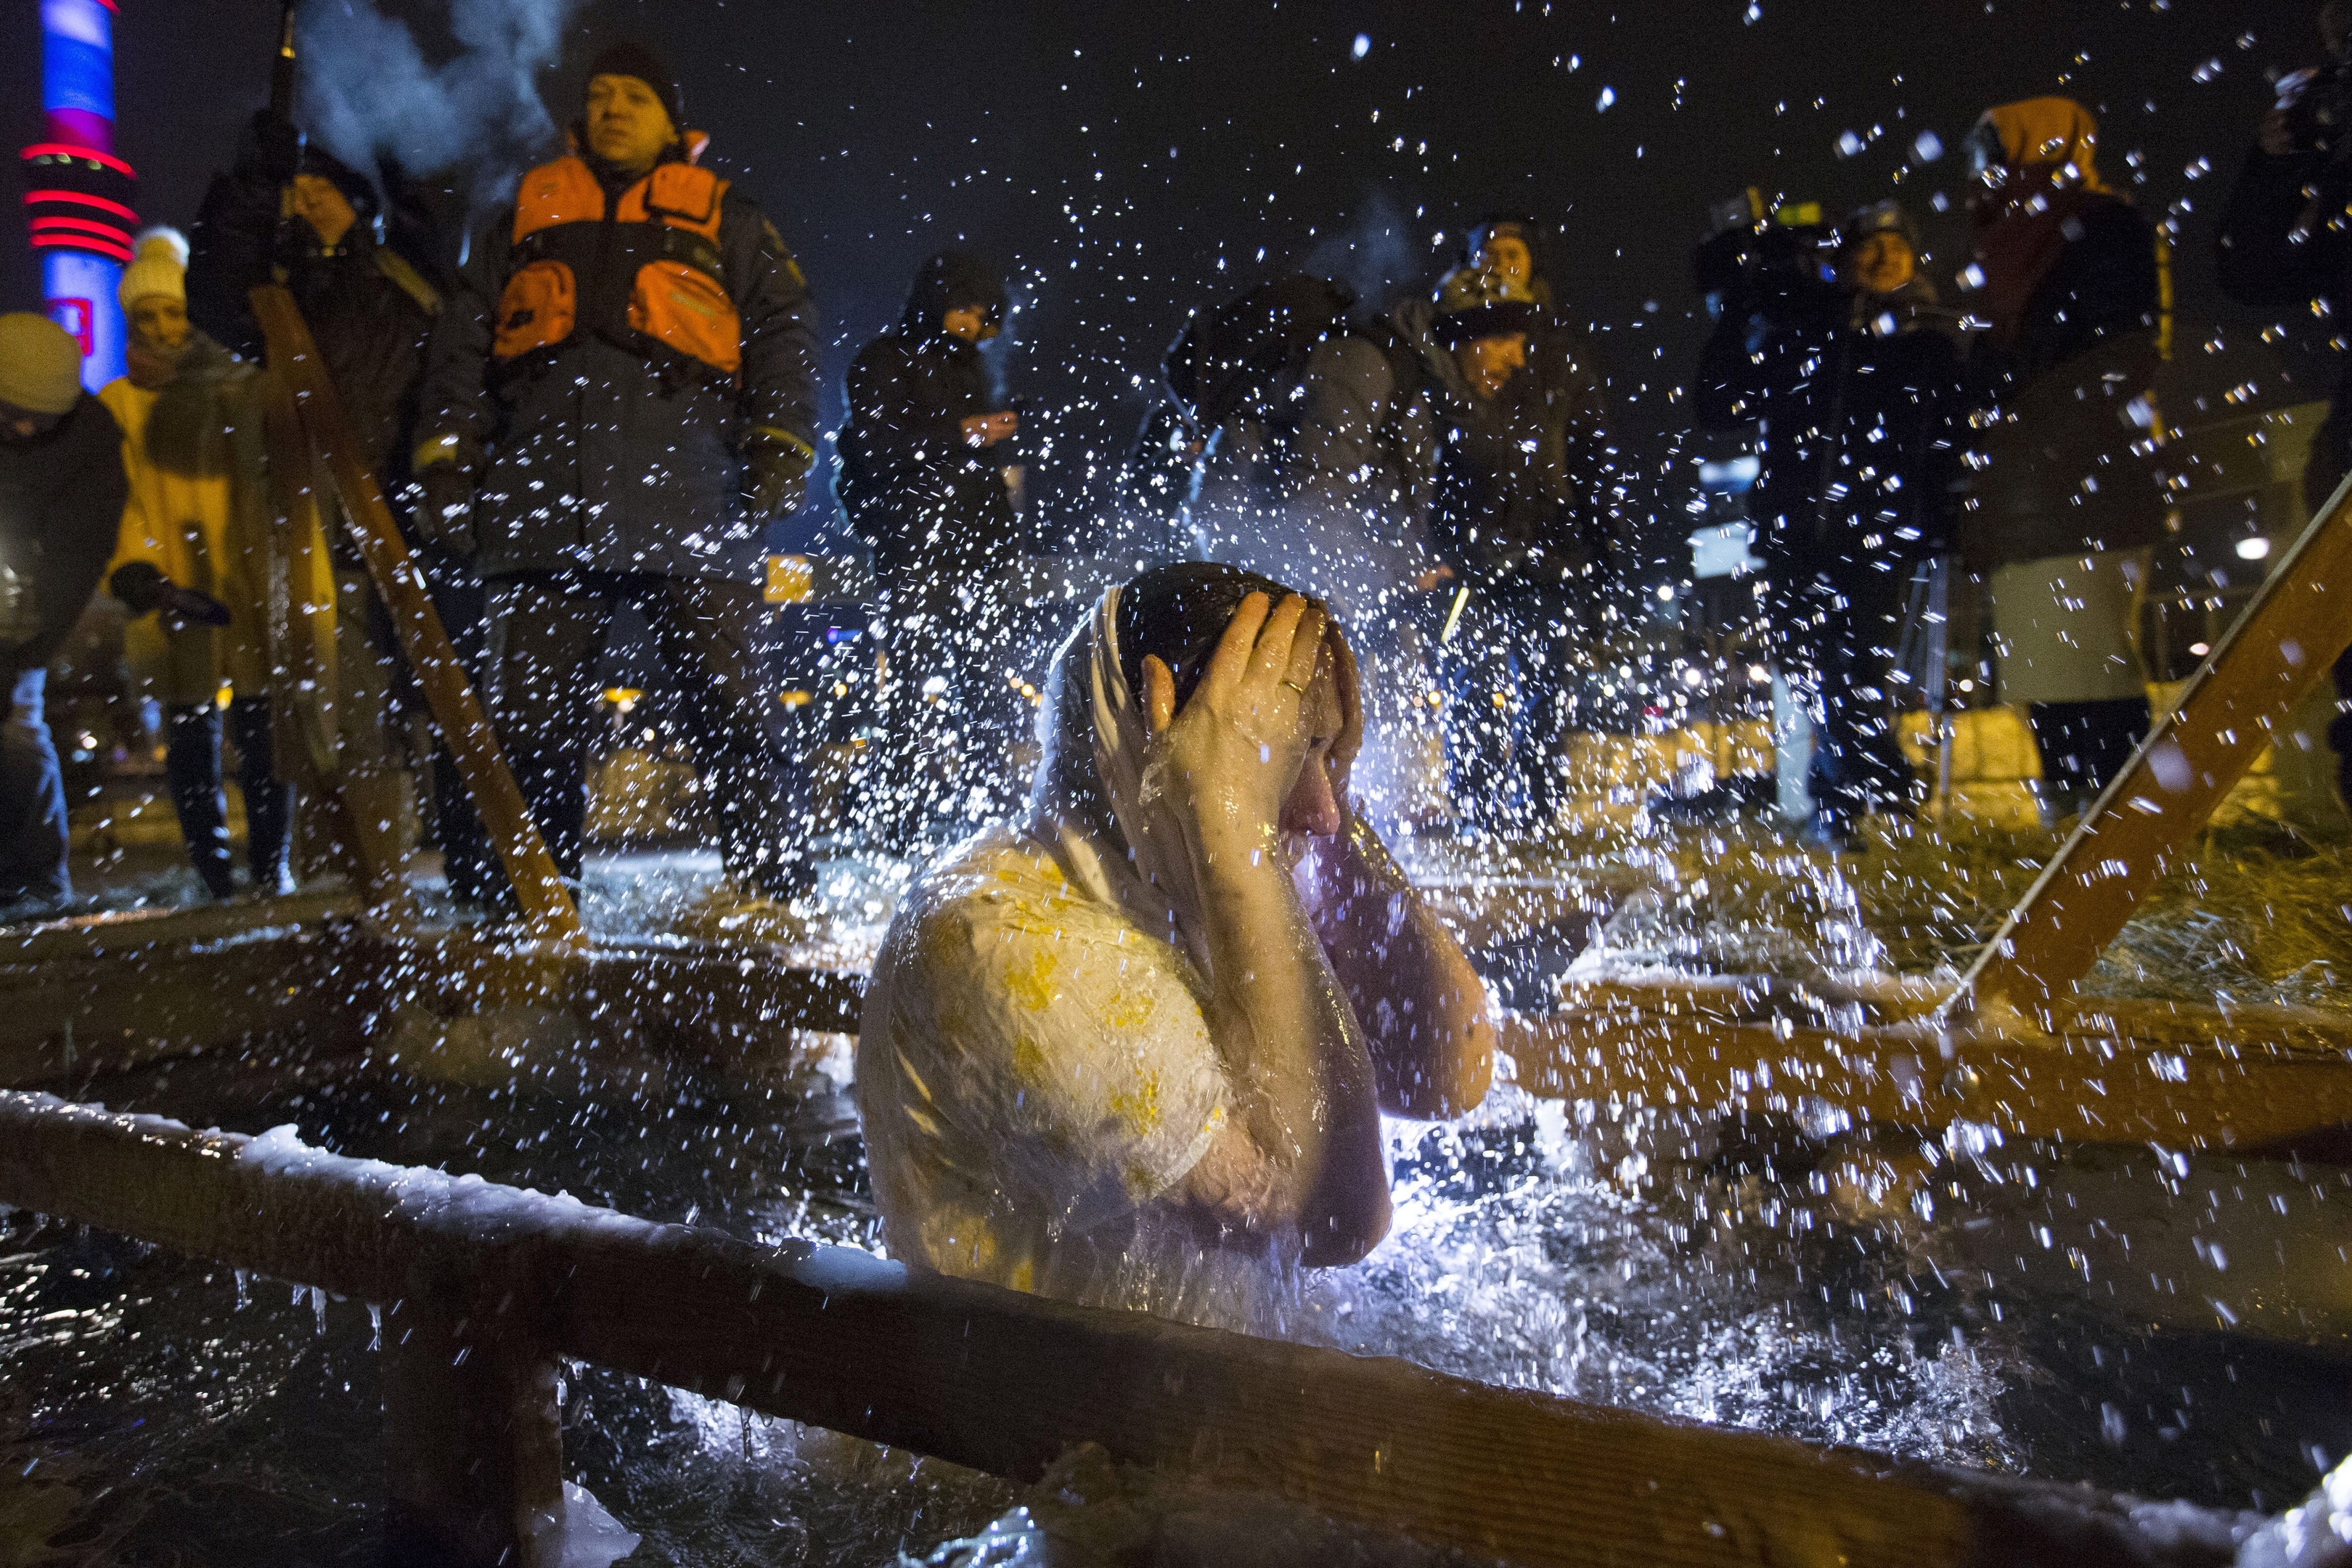 A Russian Orthodox believer bathes in the icy water on Epiphany at the Church of the Holy Trinity in Ostankino near TV Tower in Moscow, Russia, Monday, Jan. 18, 2016. Water that is blessed by a cleric on Epiphany is considered holy and pure until next year's celebration, and is believed to have special powers of protection and healing. The Russian Orthodox Church follows the old Julian calendar, according to which Epiphany falls on Jan. 19. (AP Photo/Alexander Zemlianichenko Jr)